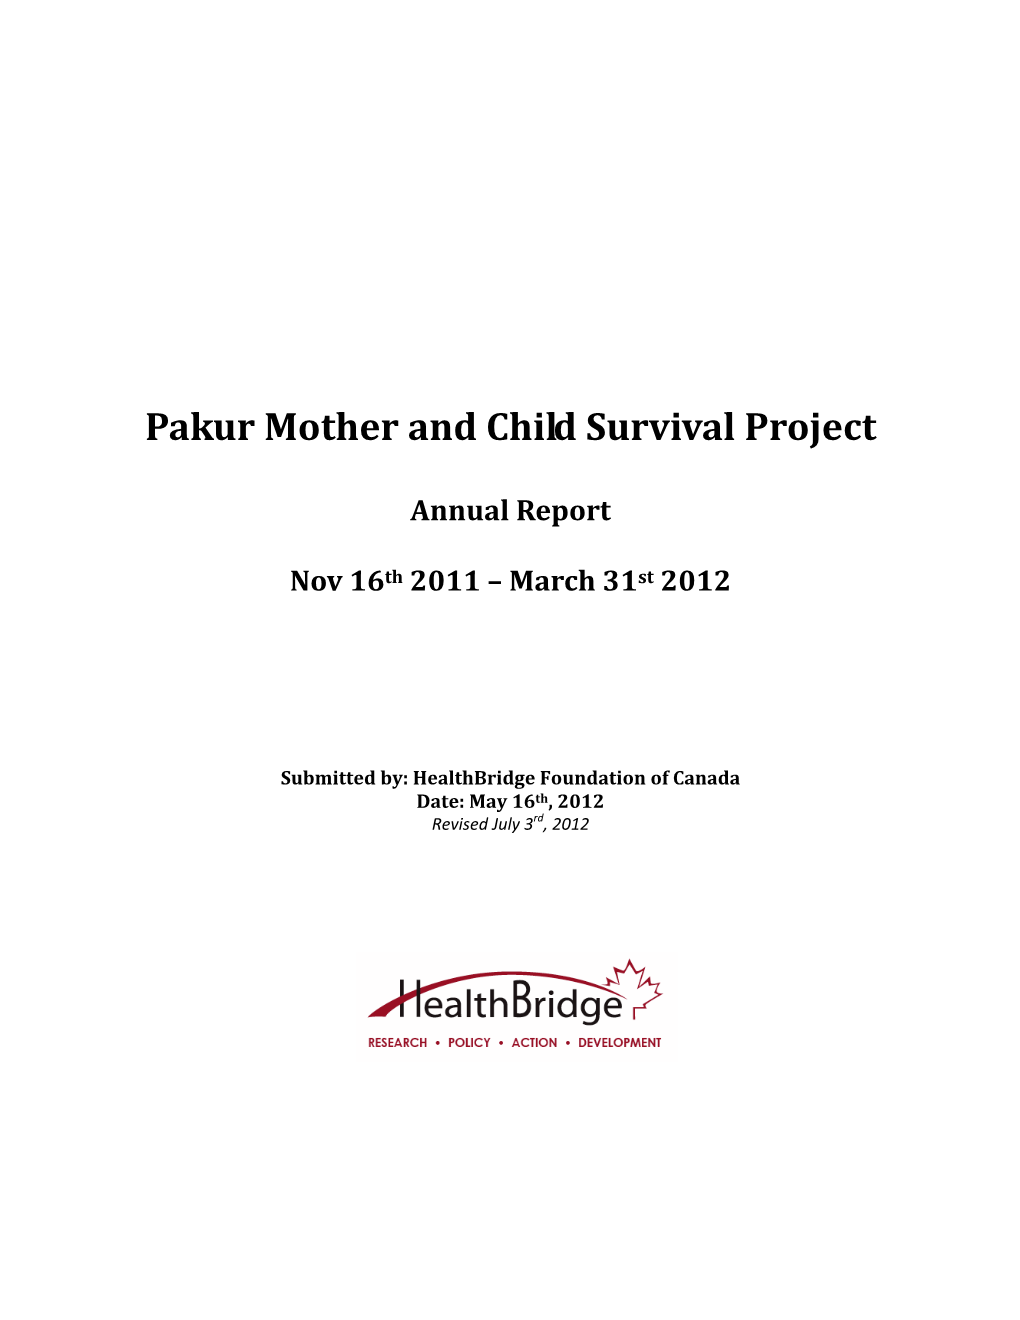 Pakur Mother and Child Survival Project Annual Report for Fiscal